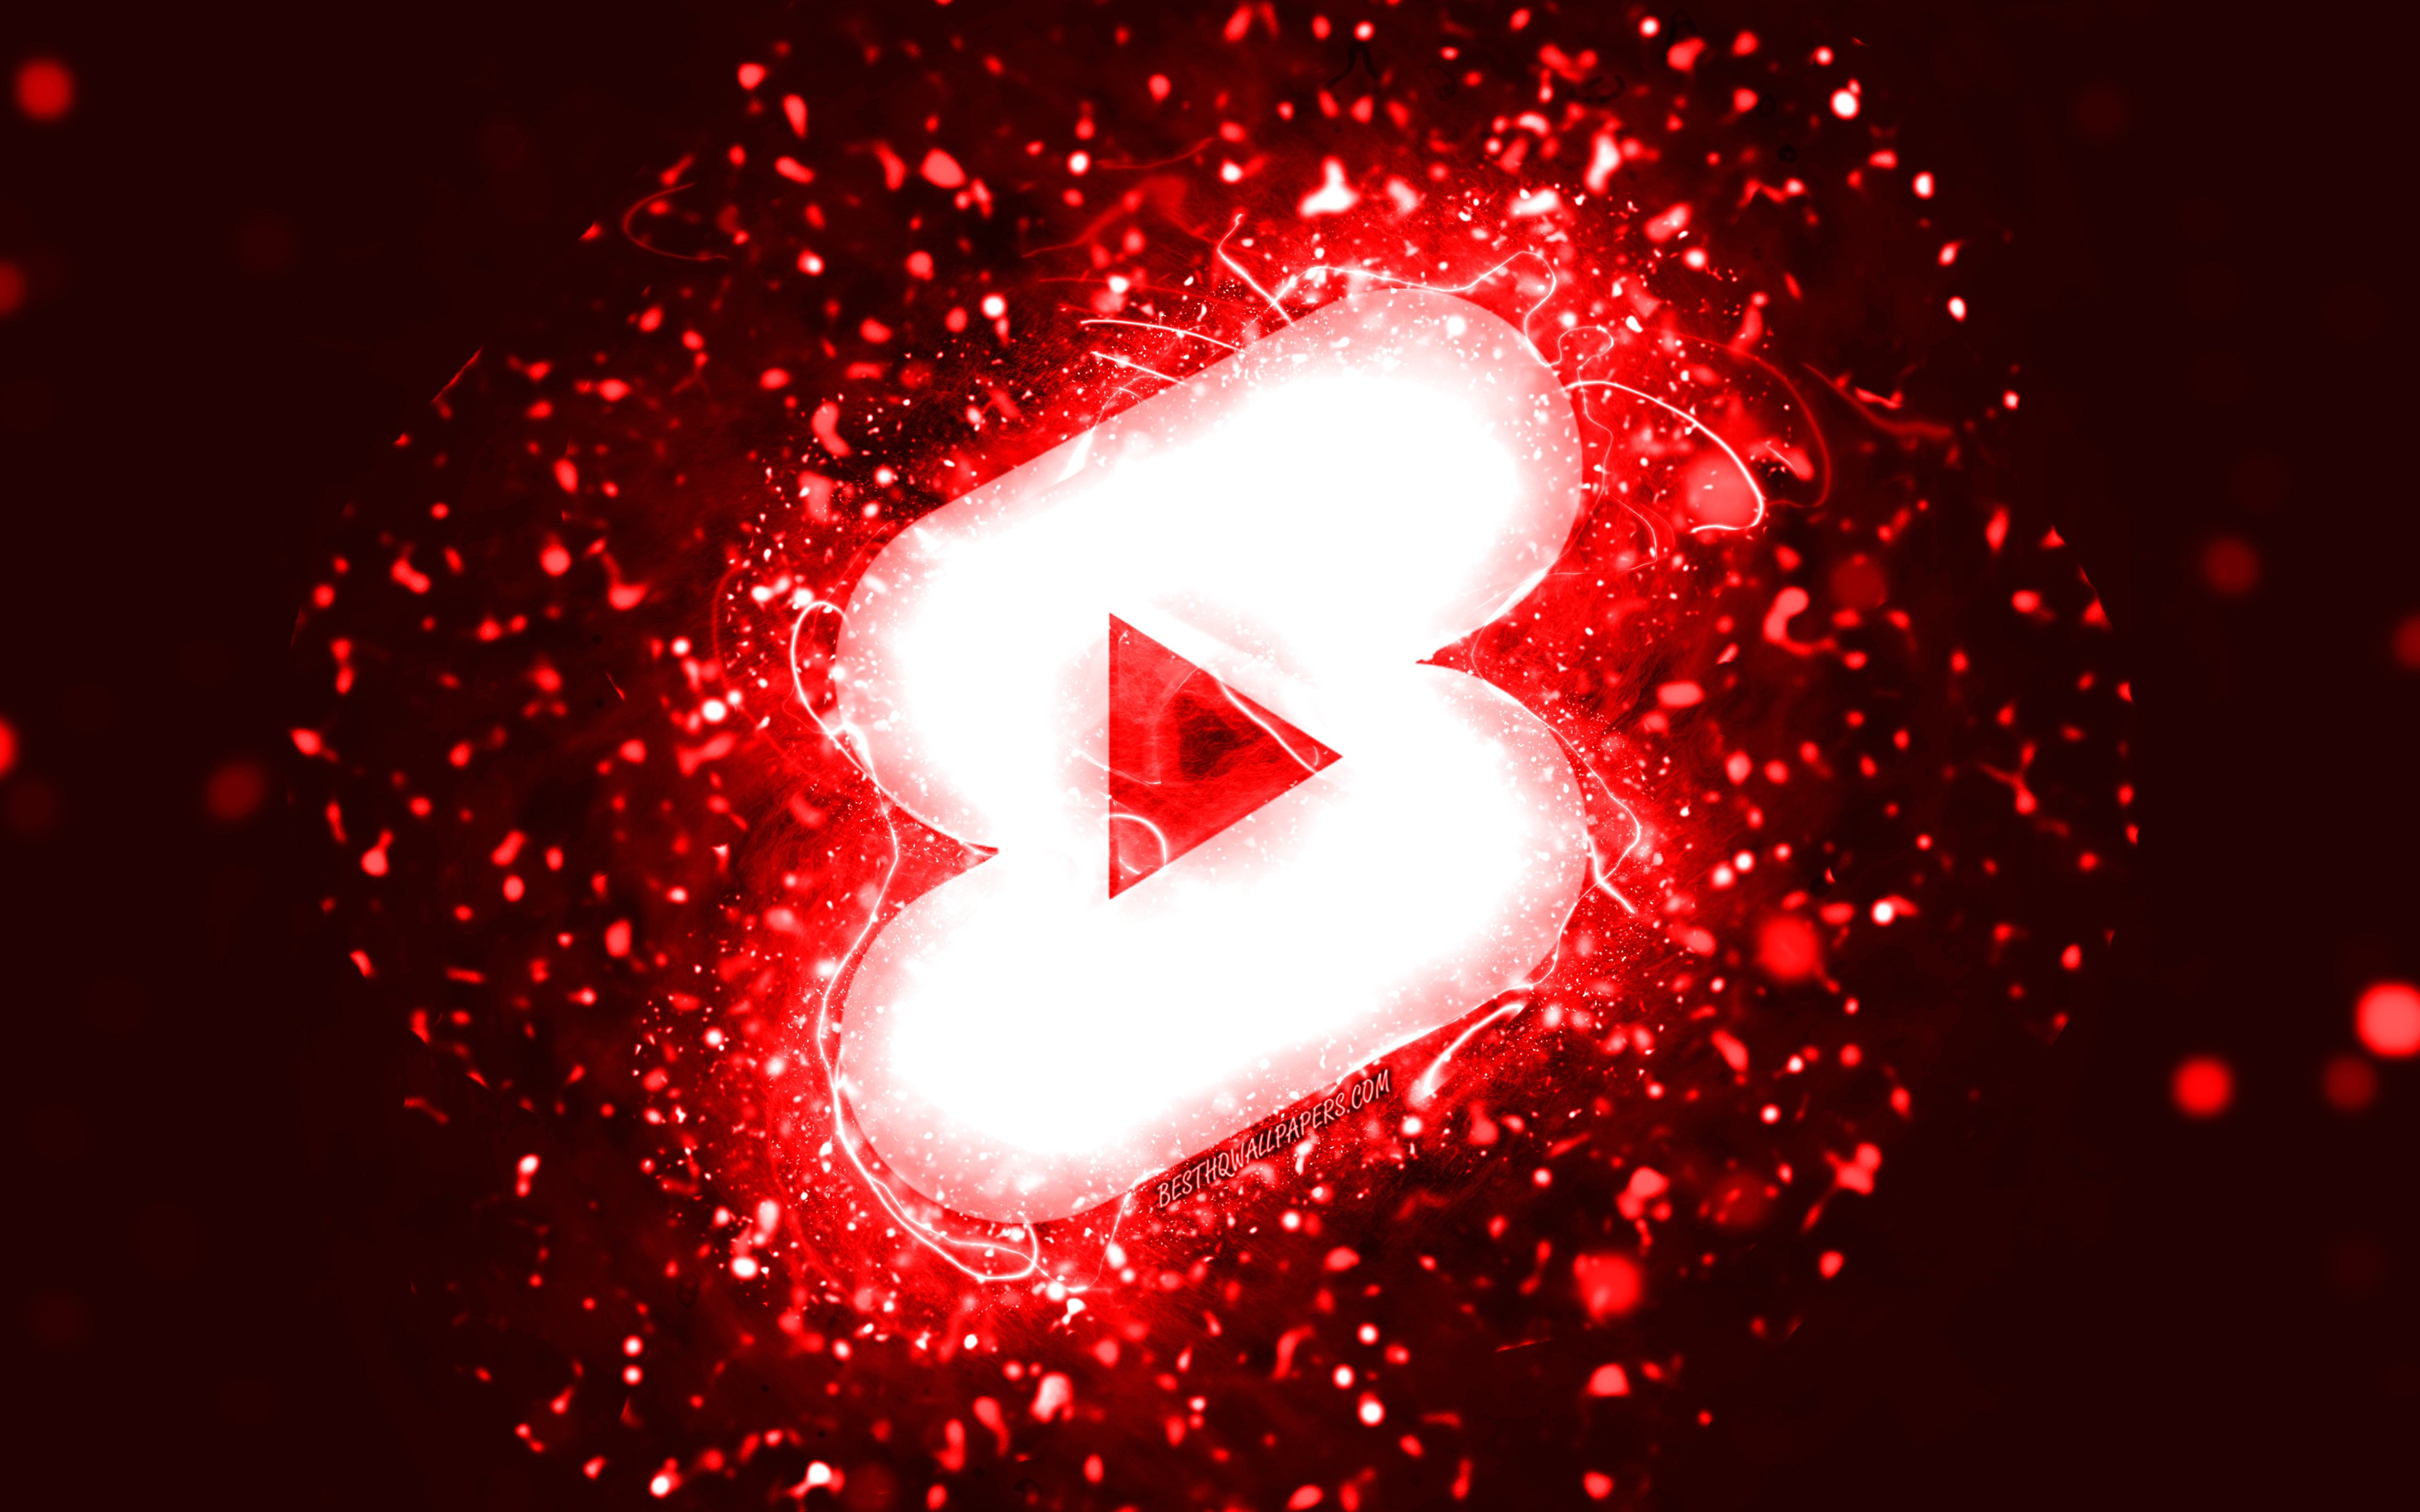 Download wallpapers Youtube shorts red logo, 4k, red neon lights